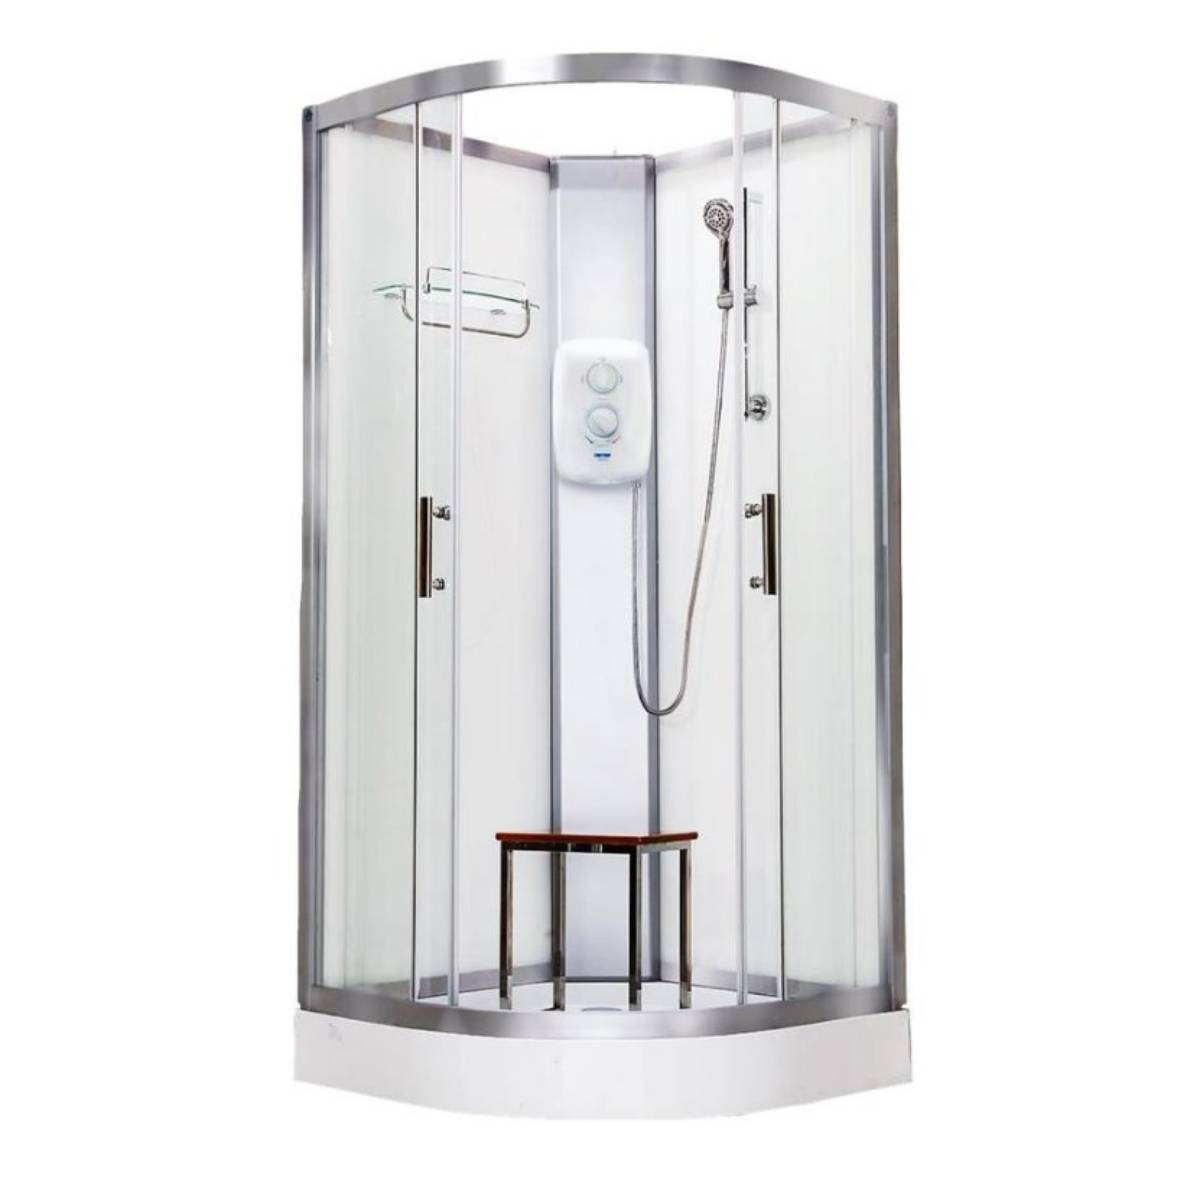 Vidalux Pure Electric 800mm Shower Cabin White - Standard 8.5KW (11642)